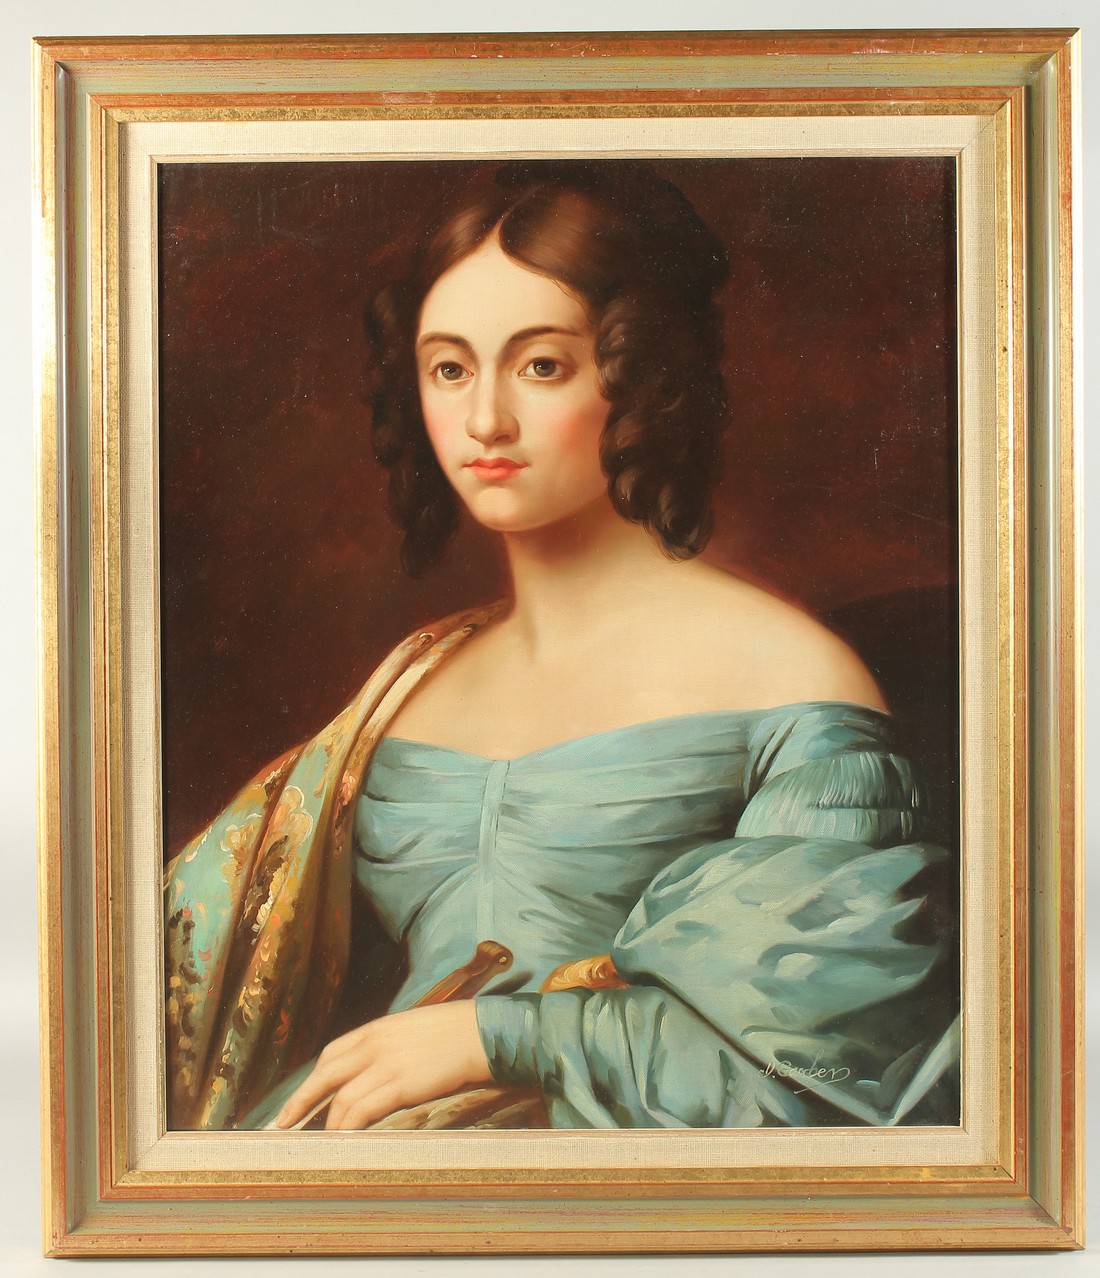 A 20th Century Portrait of a lady wearing a turquoise coloured off the shoulder dress and holding